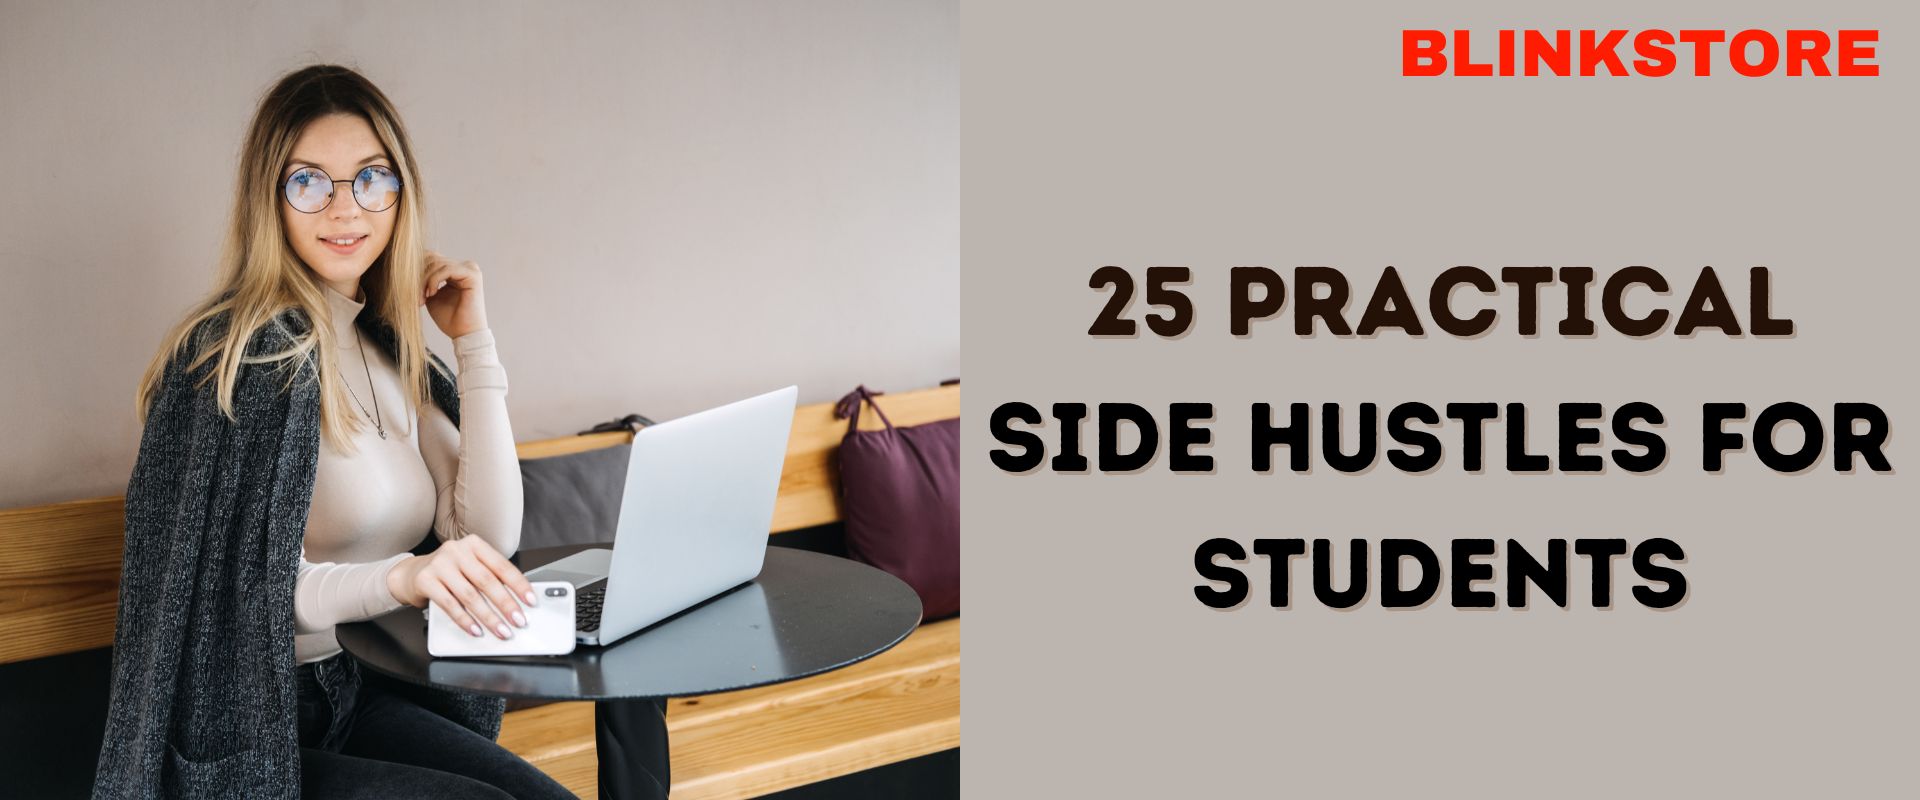 25 Practical Side Hustles for Students That You Should Know